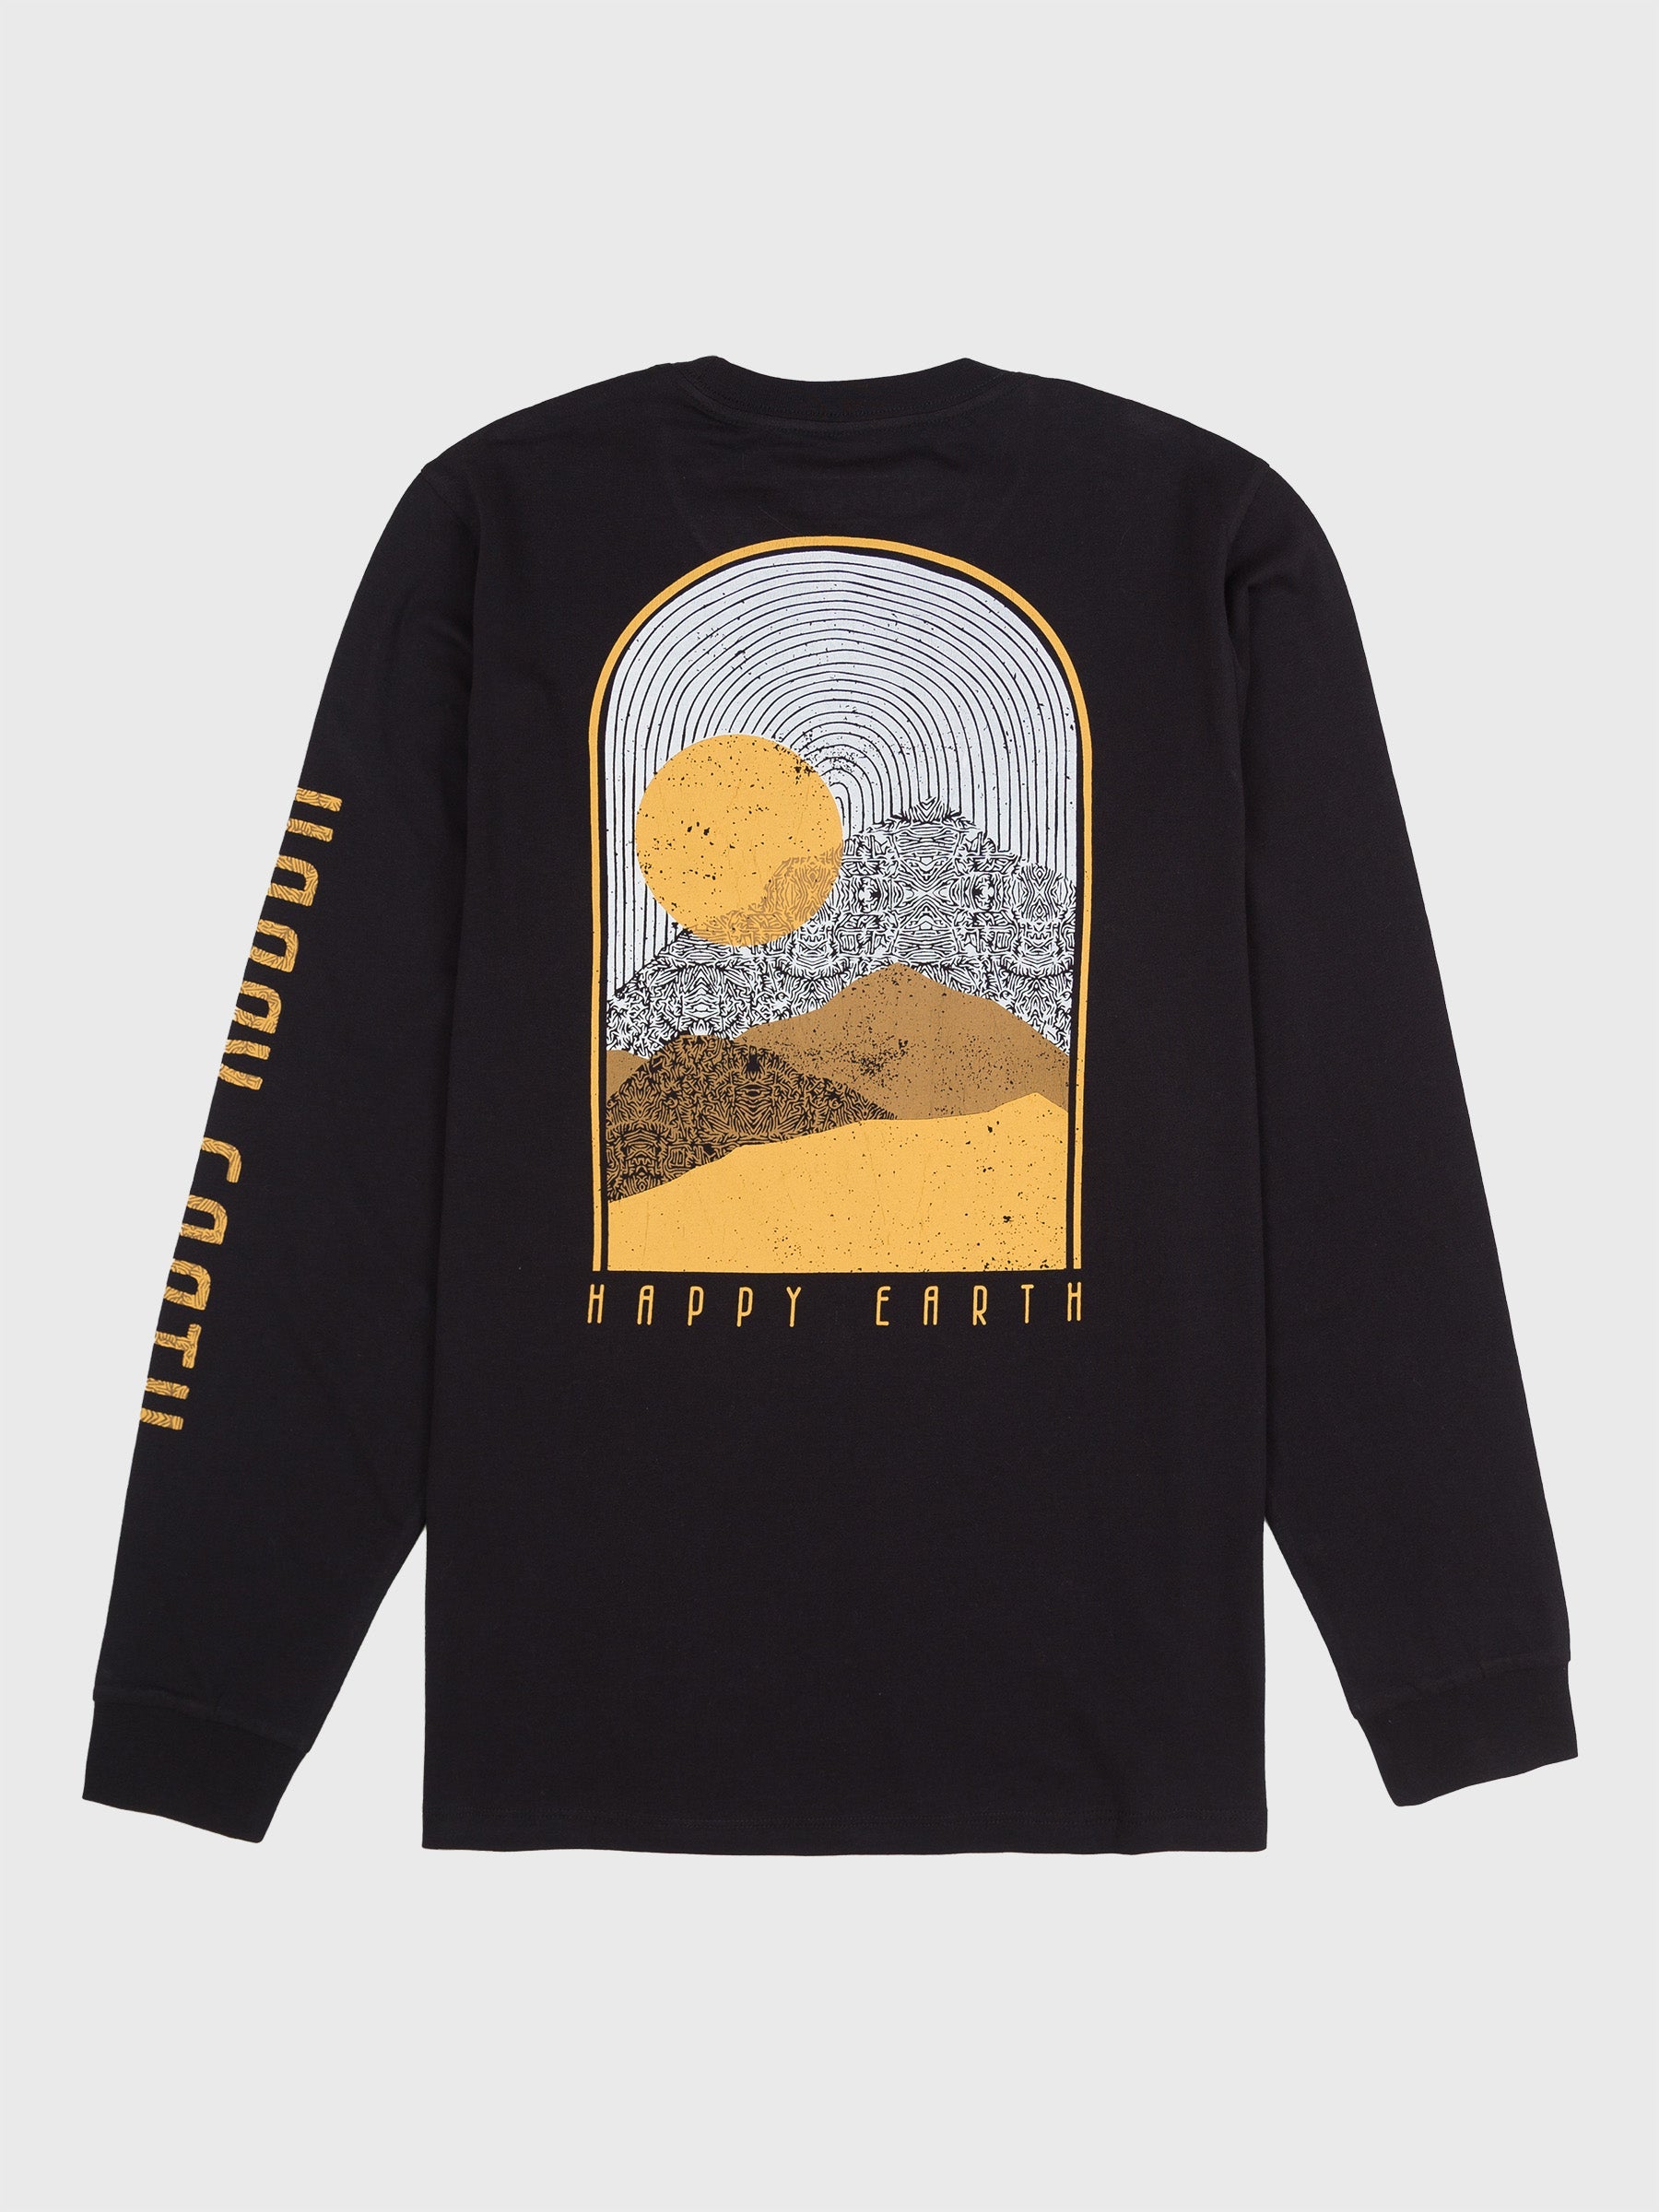 Golden Mountains Tee by Happy Earth